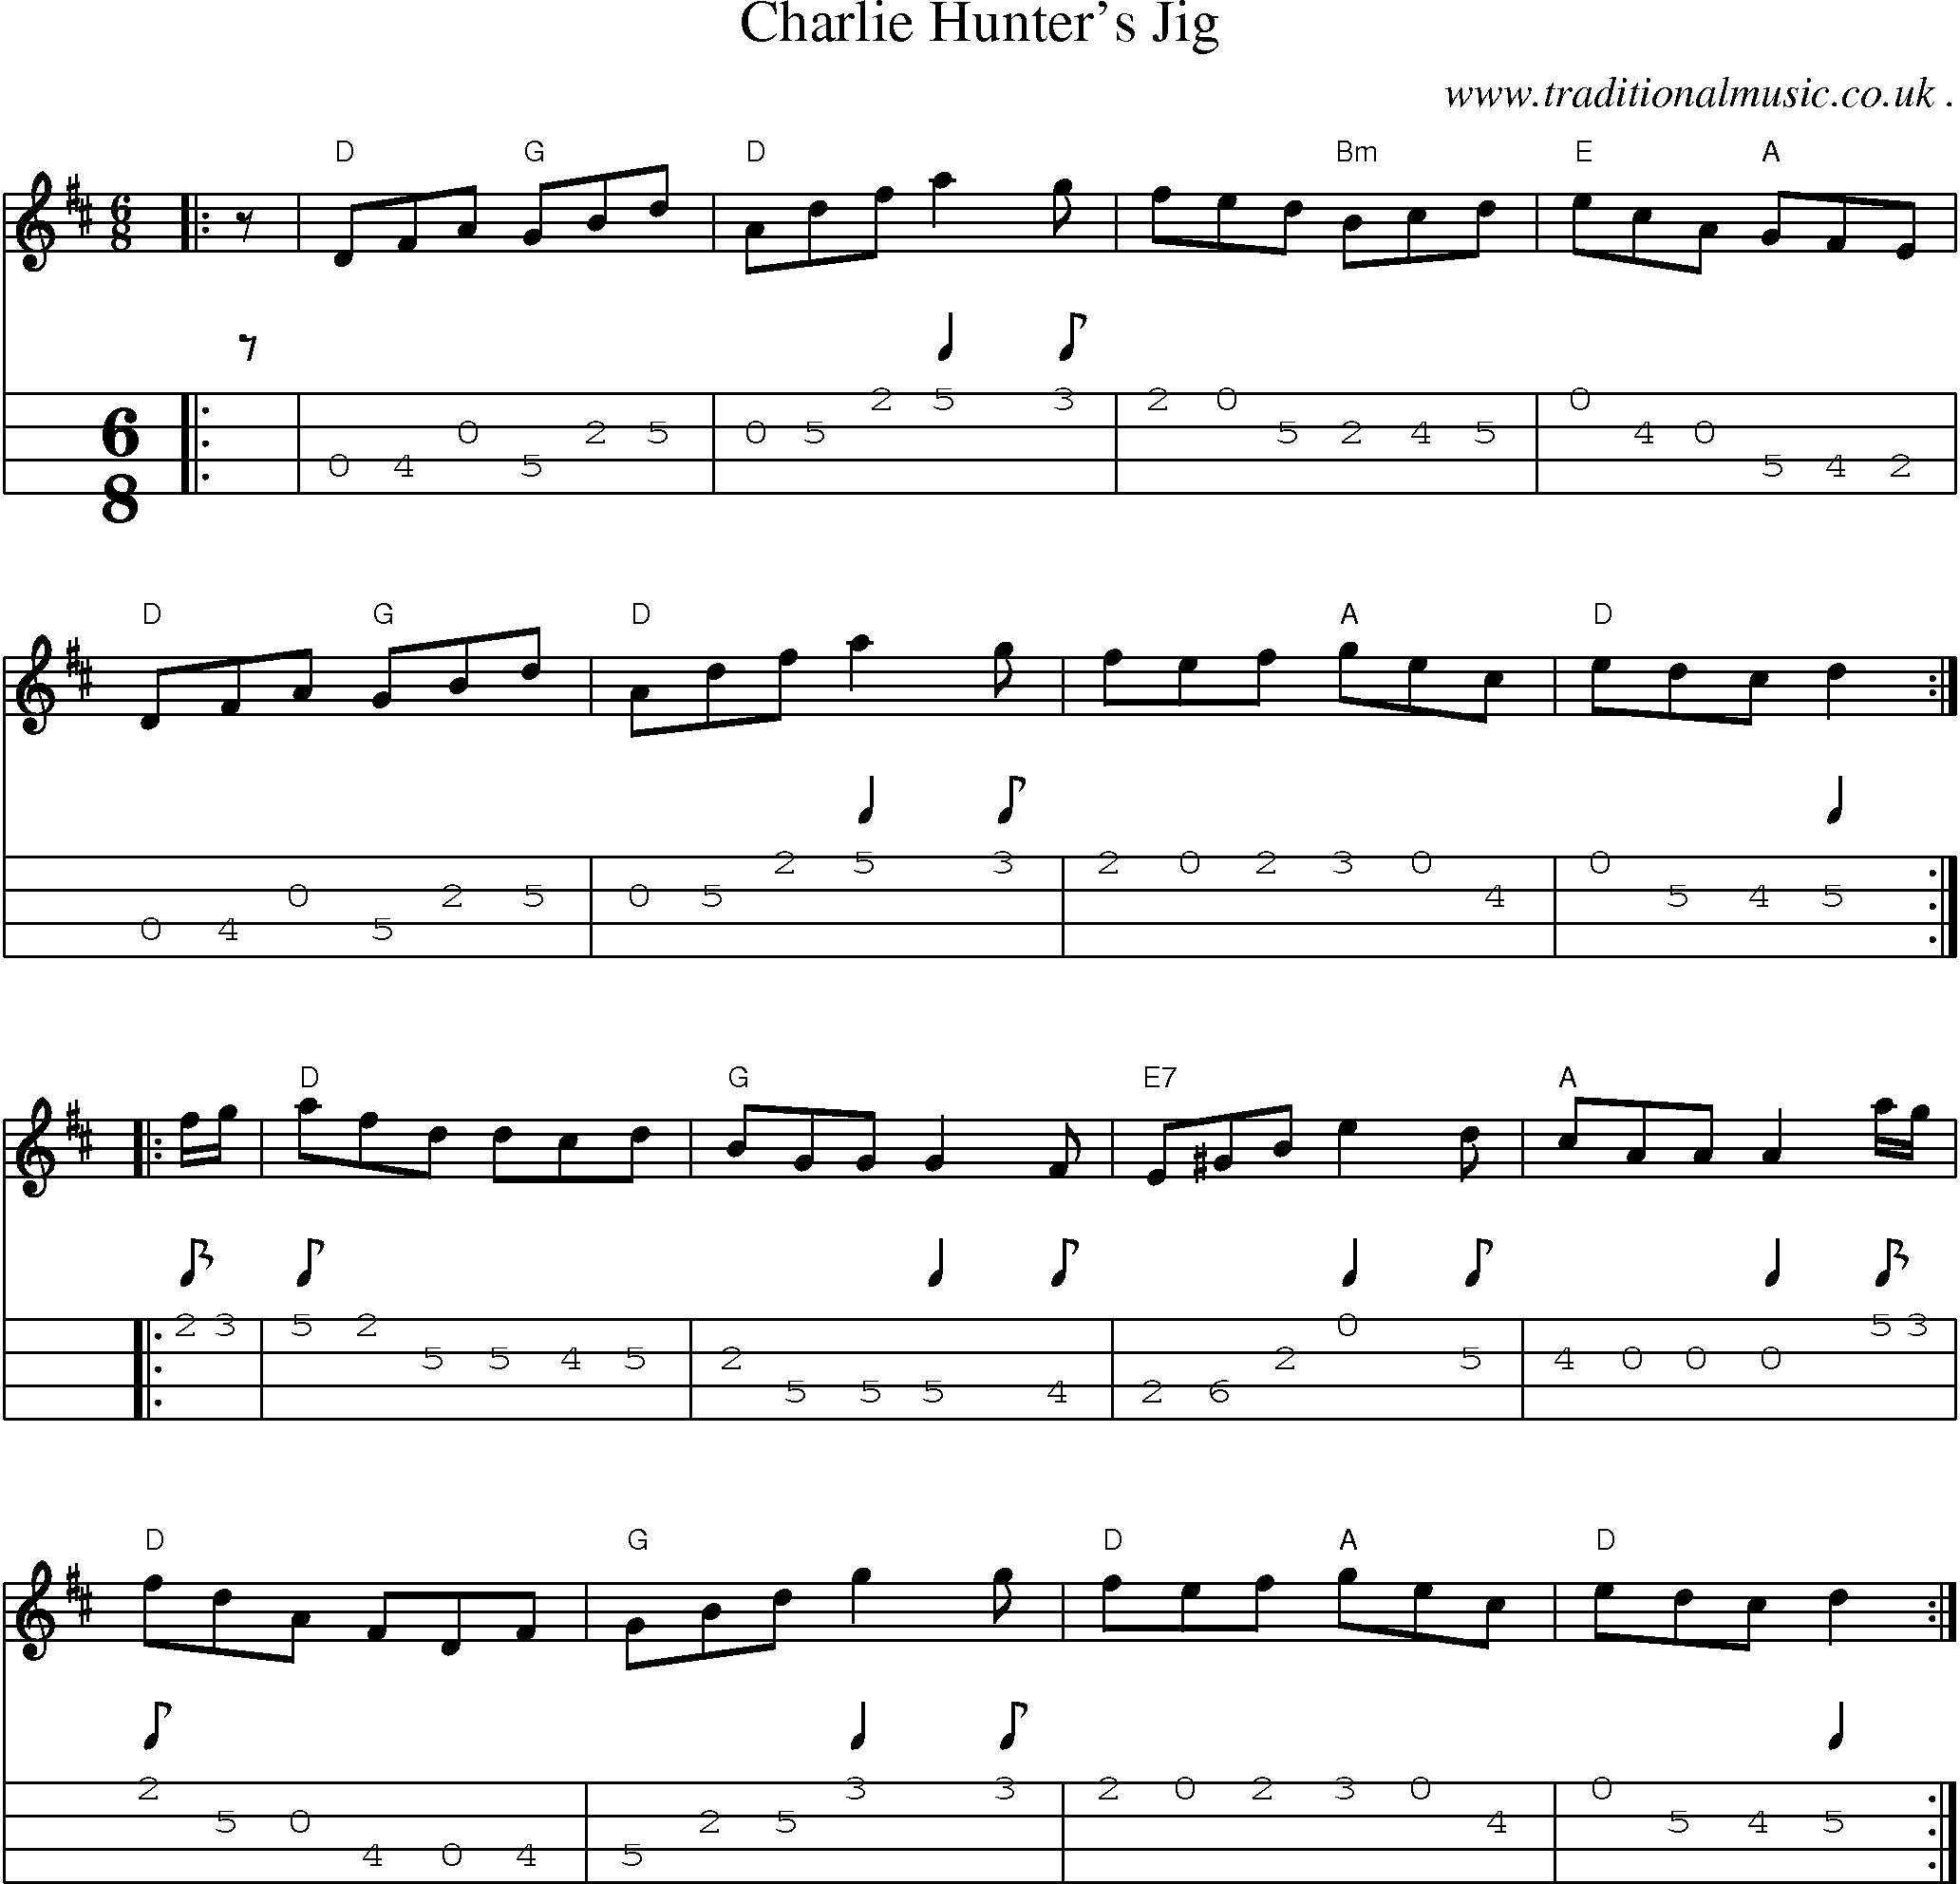 Music Score and Guitar Tabs for Charlie Hunters Jig